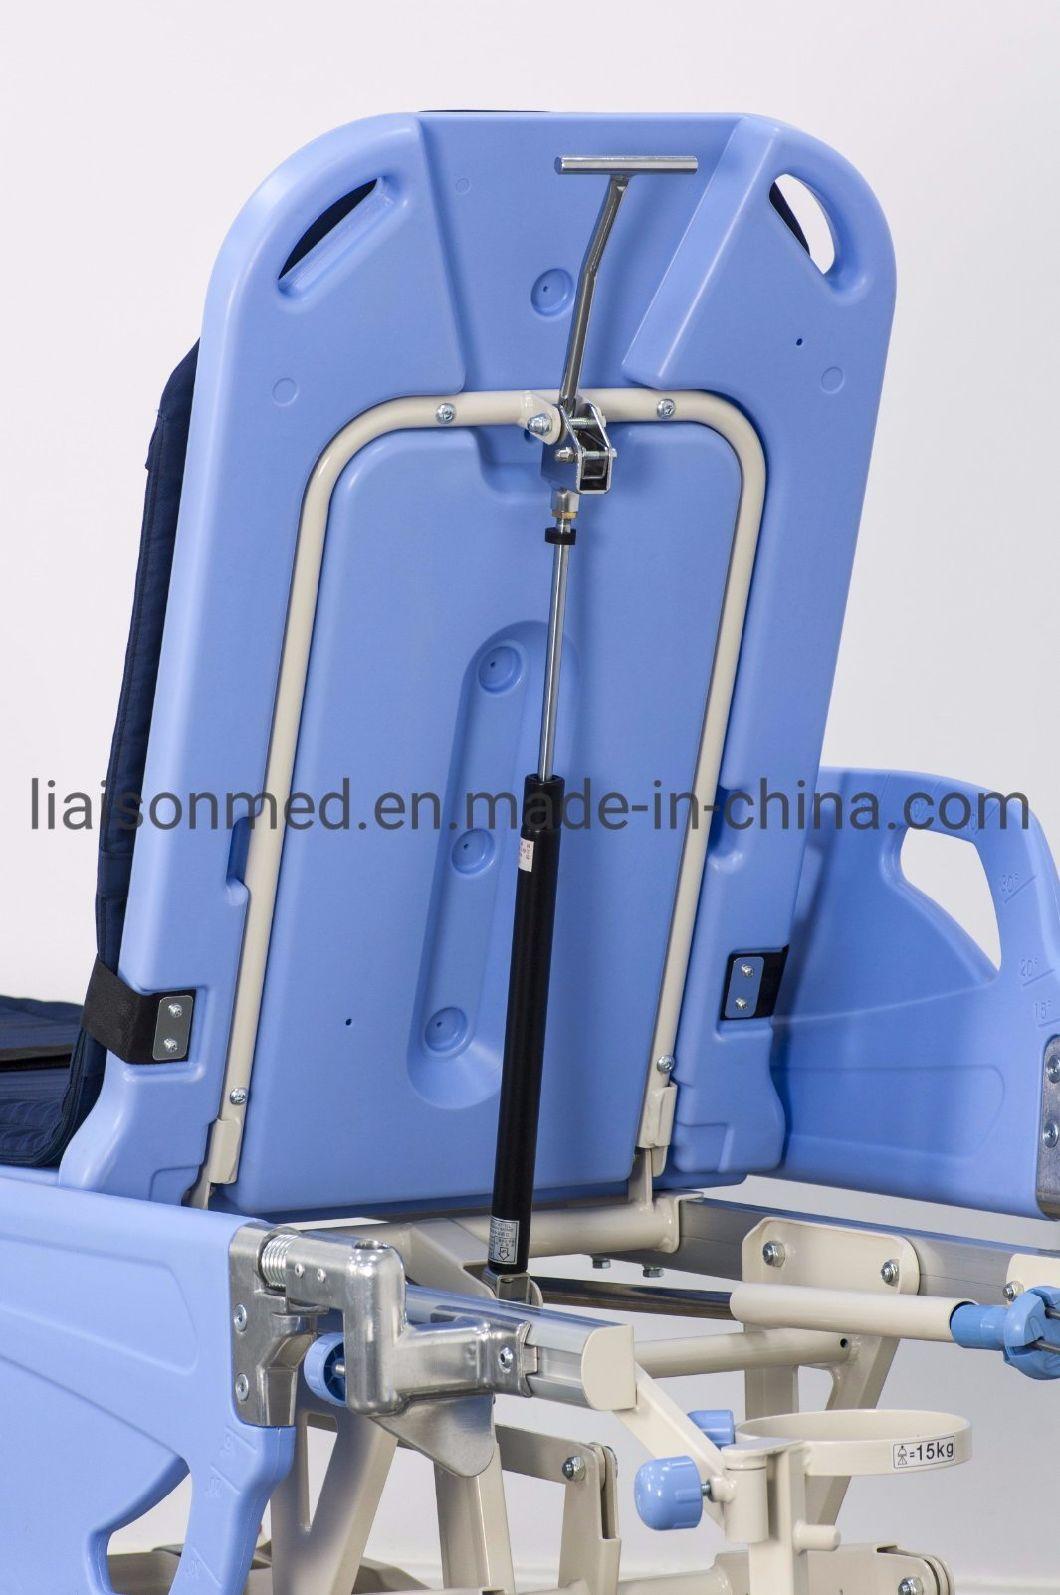 Mn-Yd001 Hospital Use ABS Patient Transfer Trolley Pump Medical Stretcher